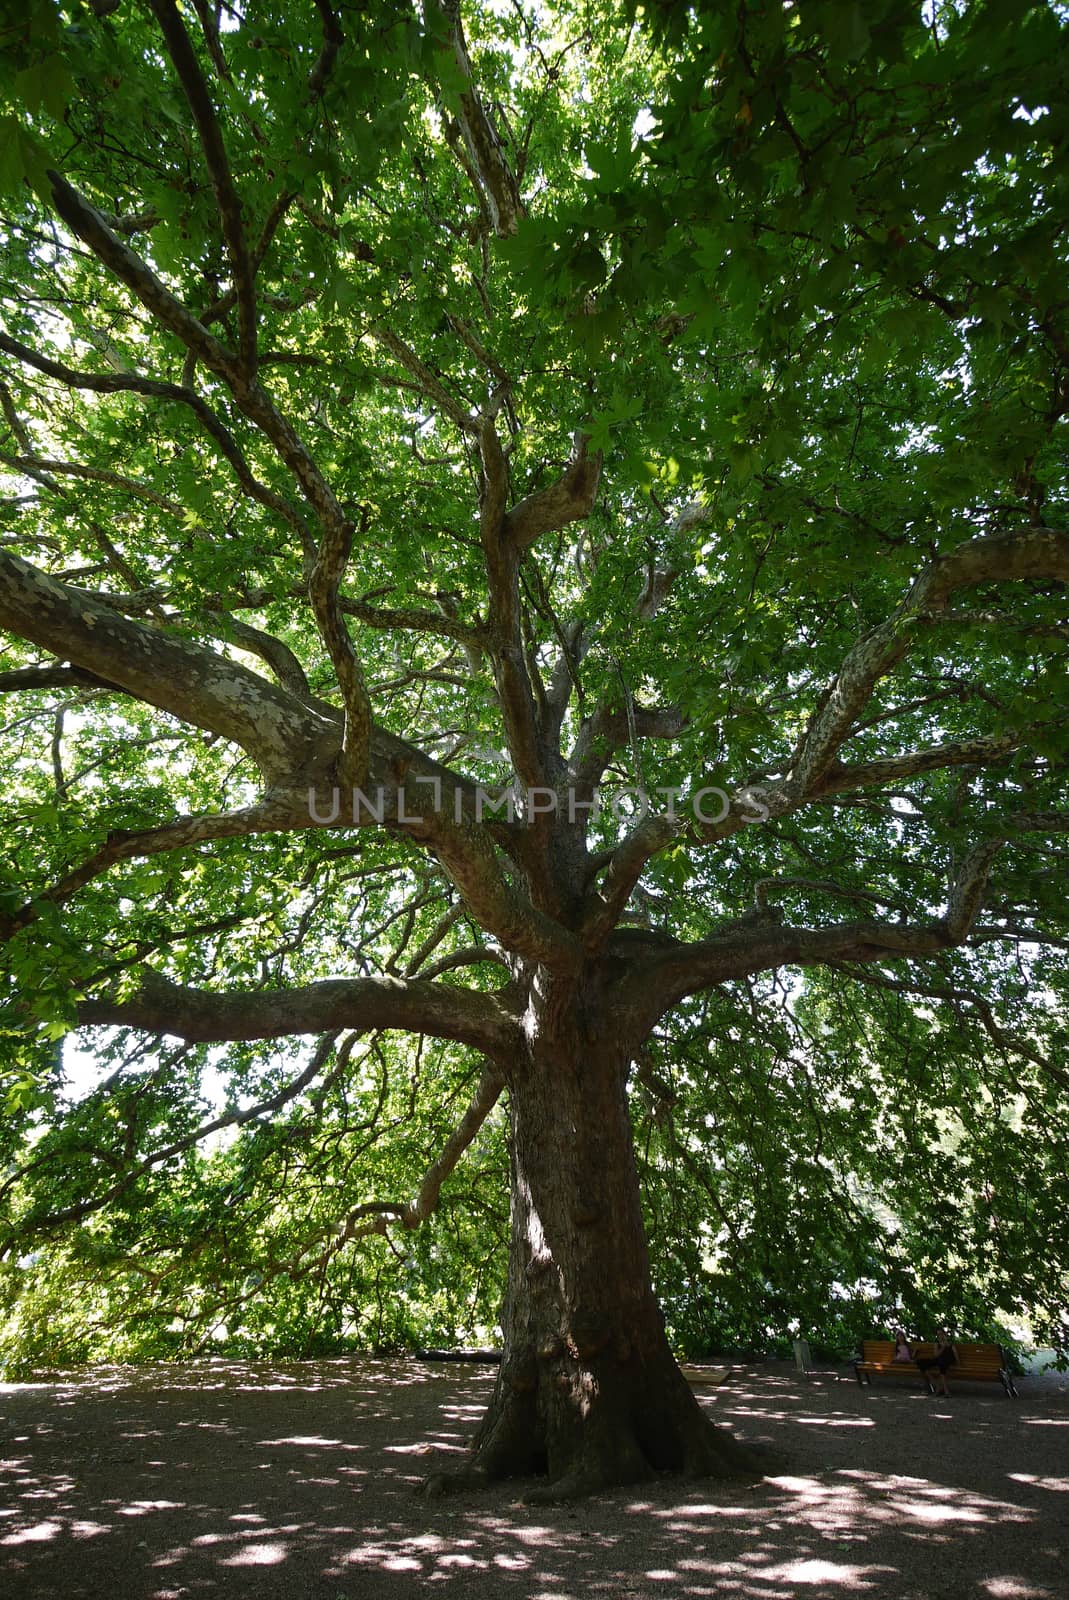 Green is a very branchy tree with thick leaves giving a big shadow under the whole tree.